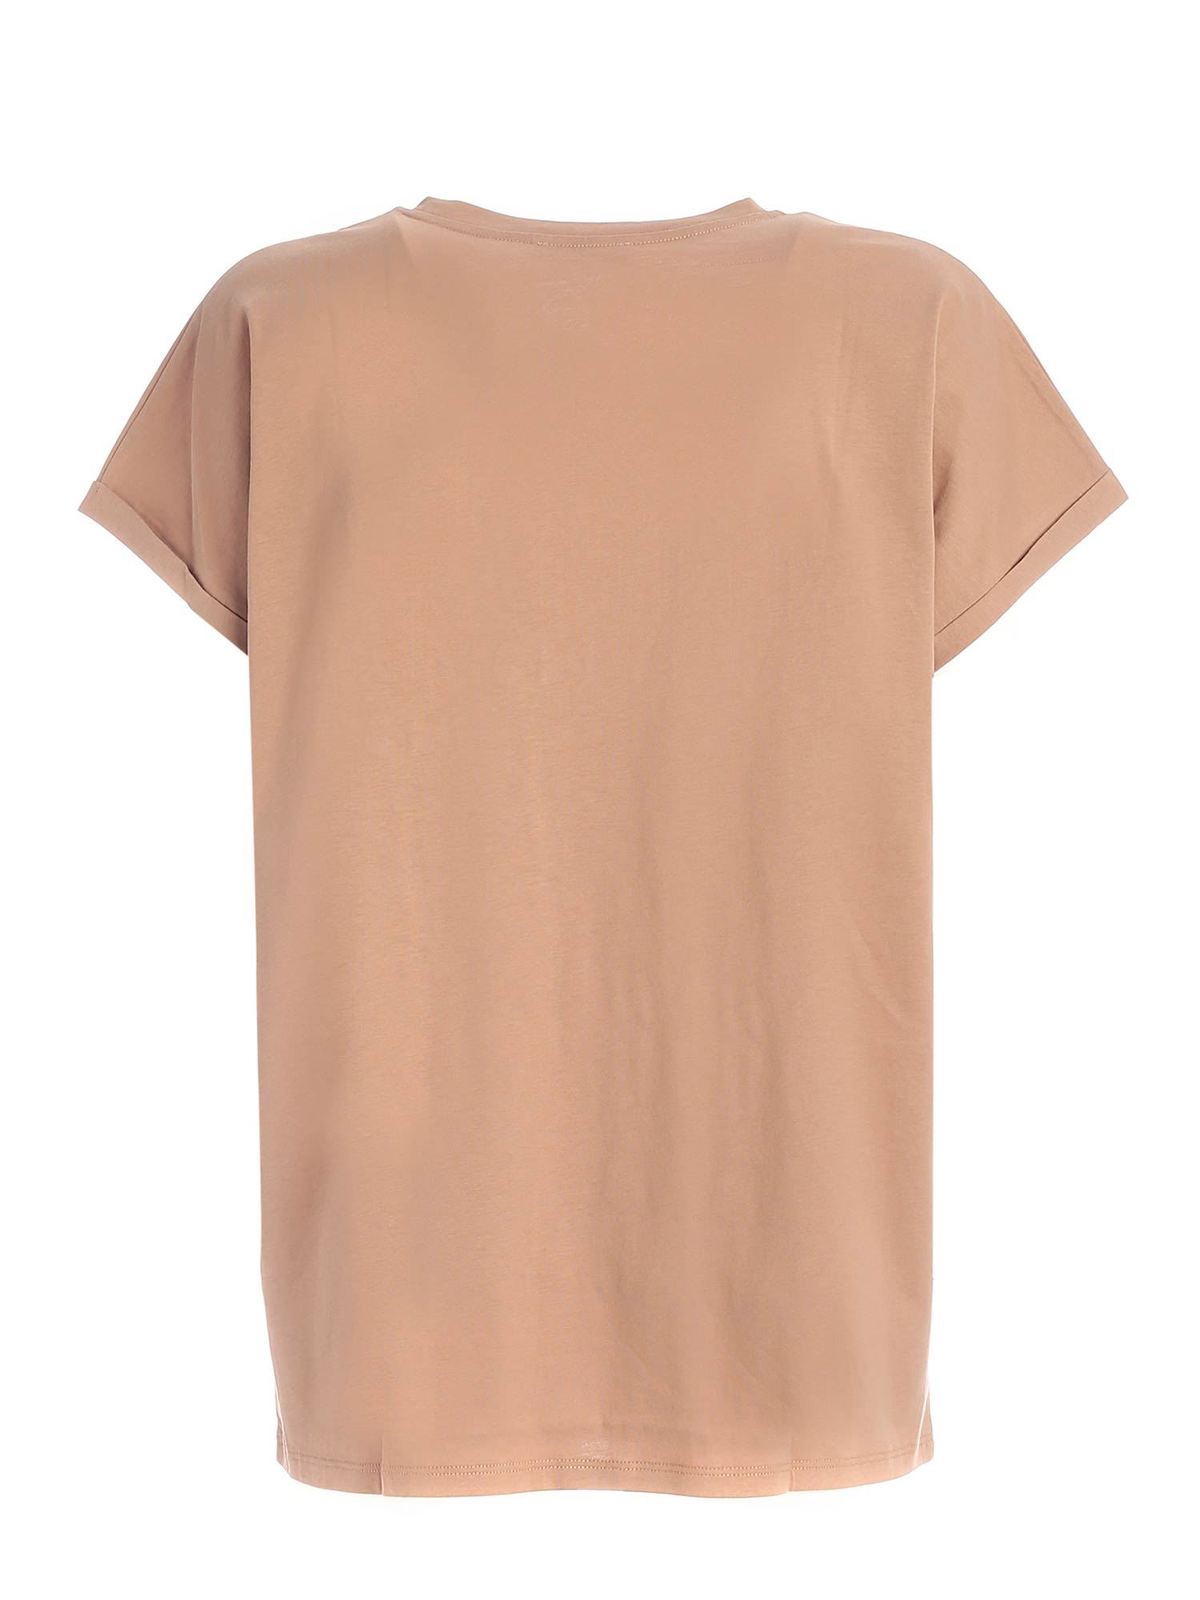 Logo patch T-shirt in nude color